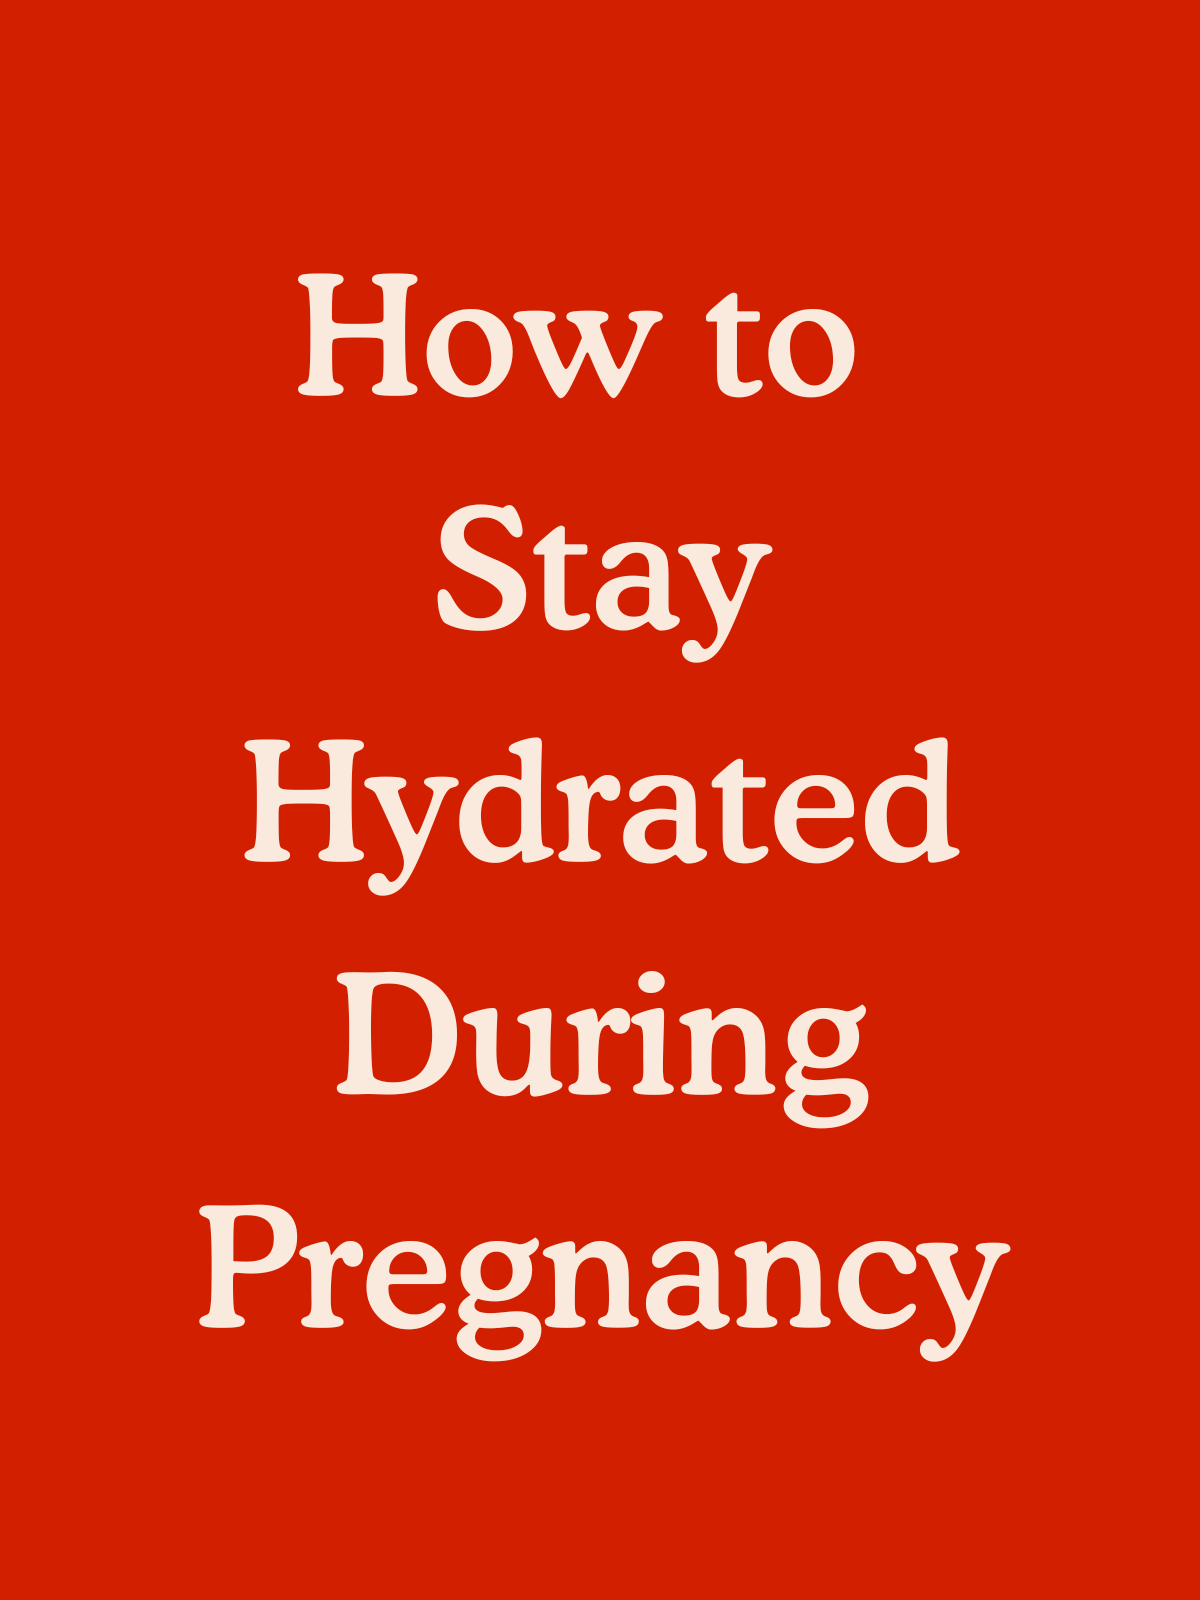 How to Stay Hydrated During Pregnancy